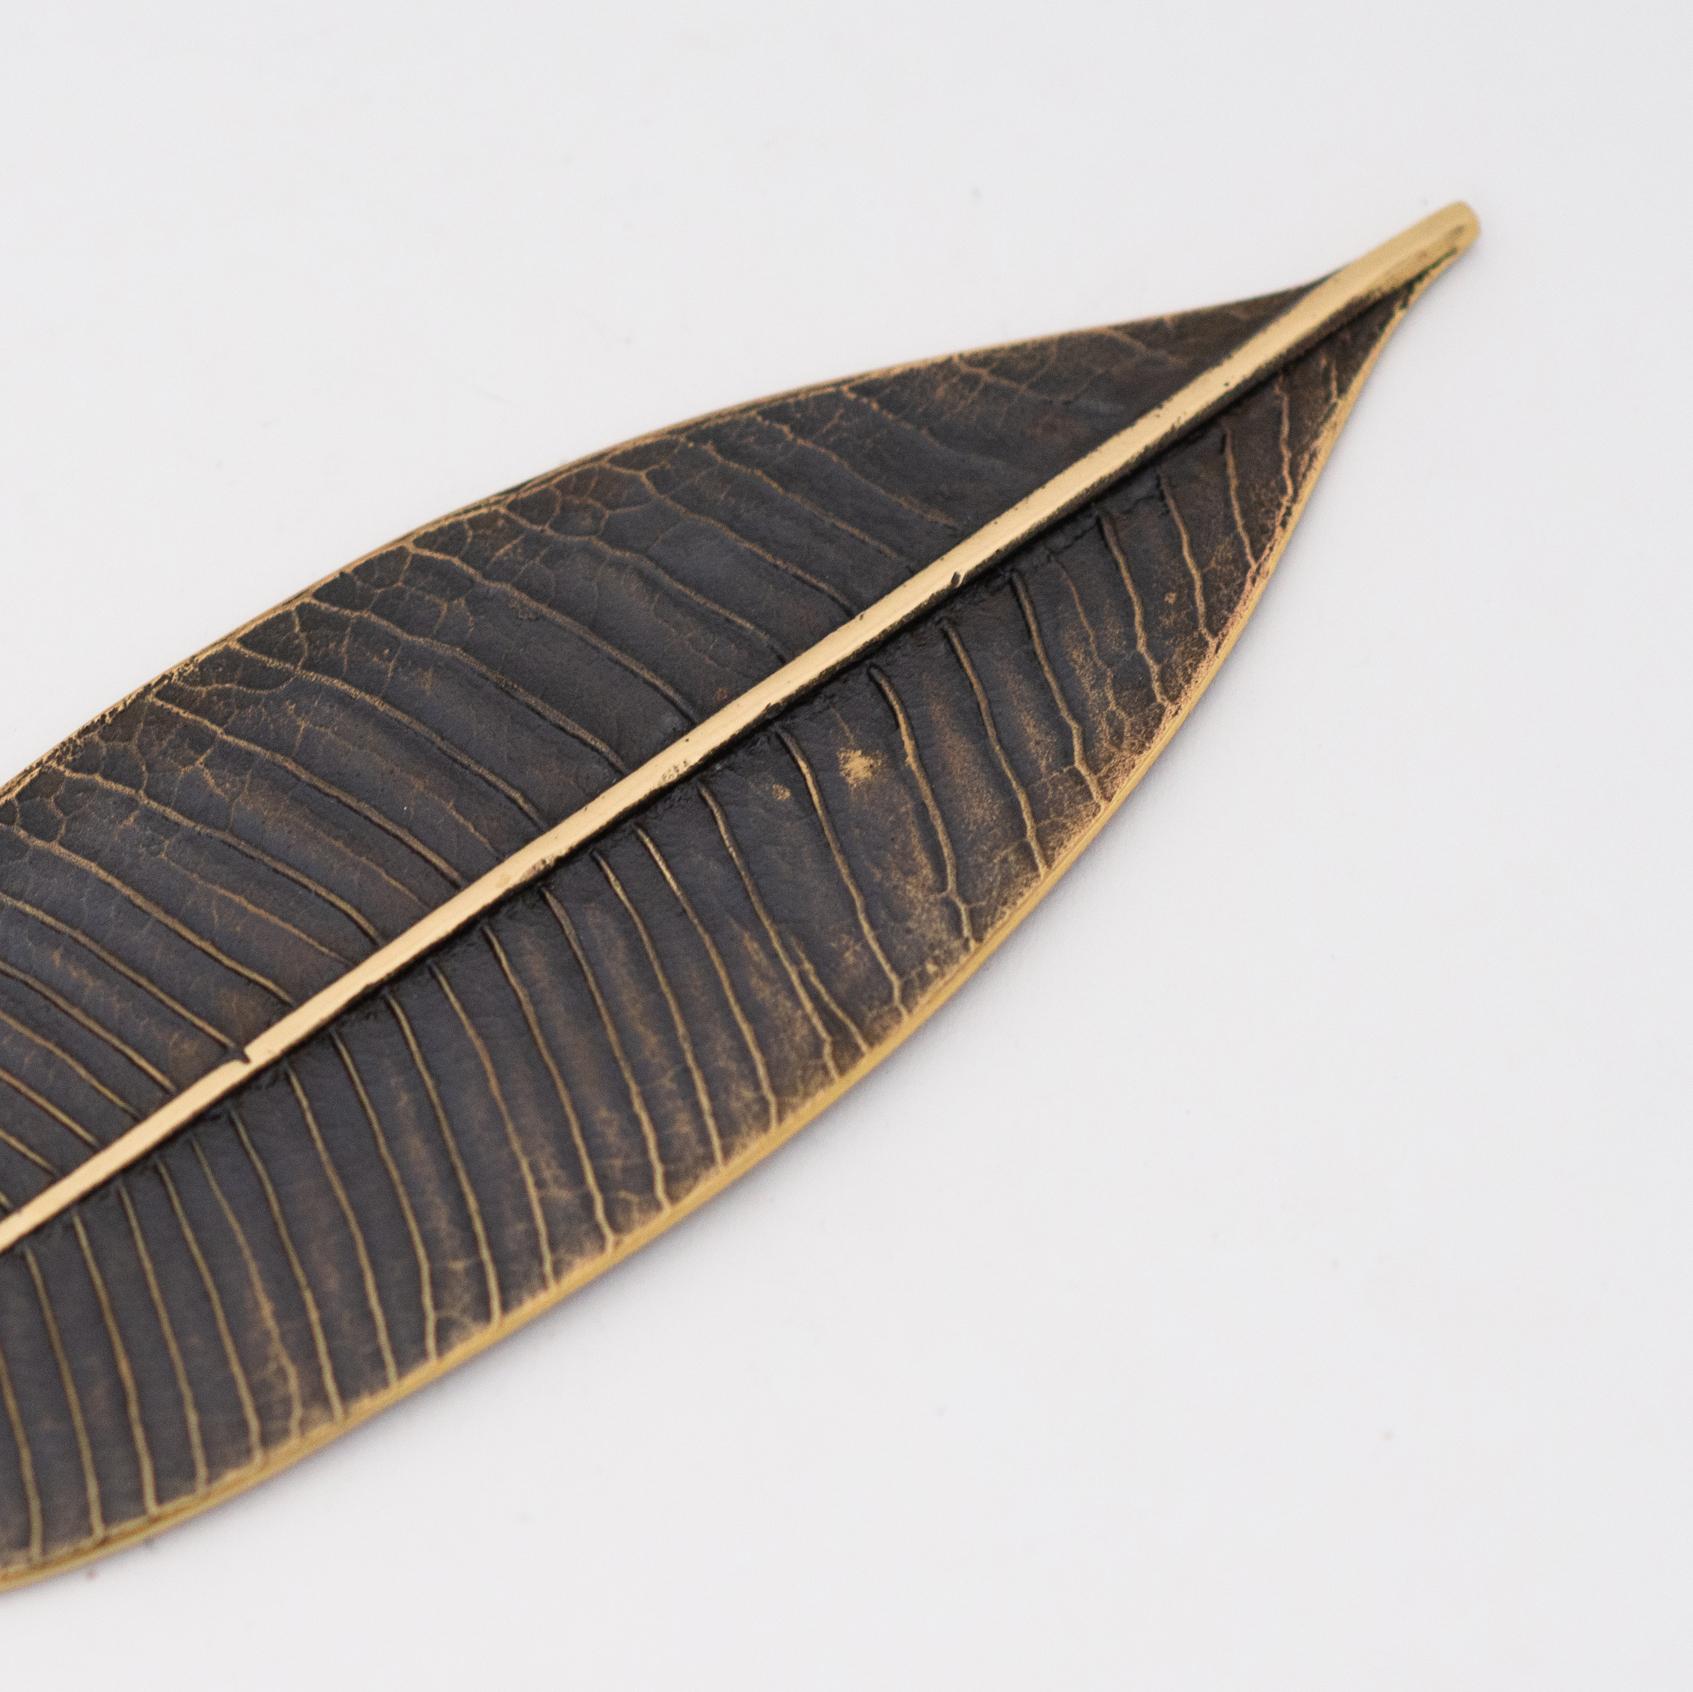 Handmade cast brass leaf with stunning details, a beautiful bronze patina finish and polished highlights. Ideal as an elegant paperweight or just a charming decorative object.

Each of those leaves are cast using very traditional techniques.